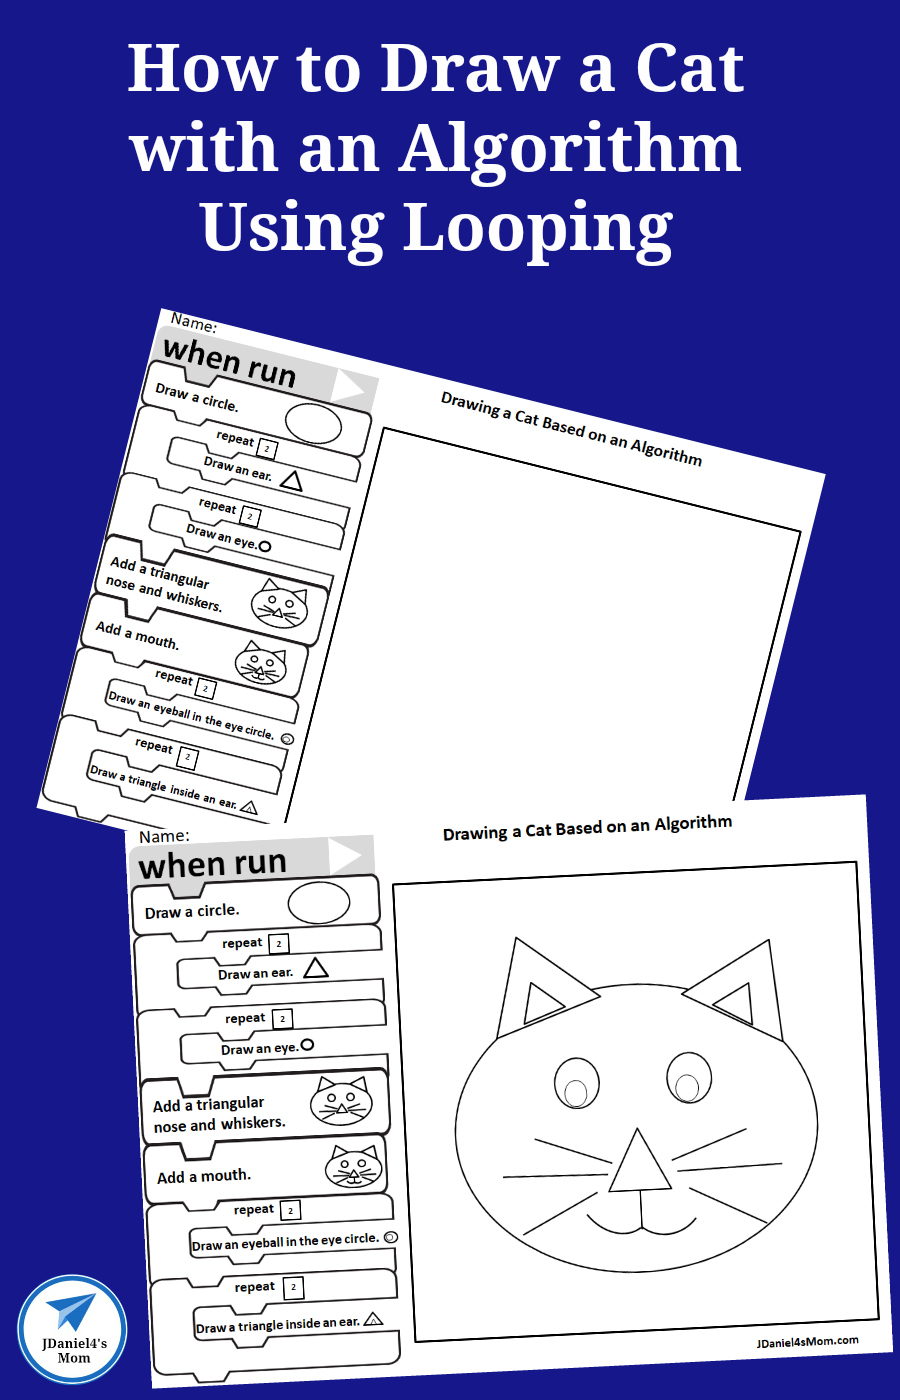 Your children will have fun learning how looping works in coding. This How to Draw a Cat with an Algorithm worksheet will give them a chance to explore coding and looping. #jdaniel4smom #coding #algorithm #howtodraw #cats